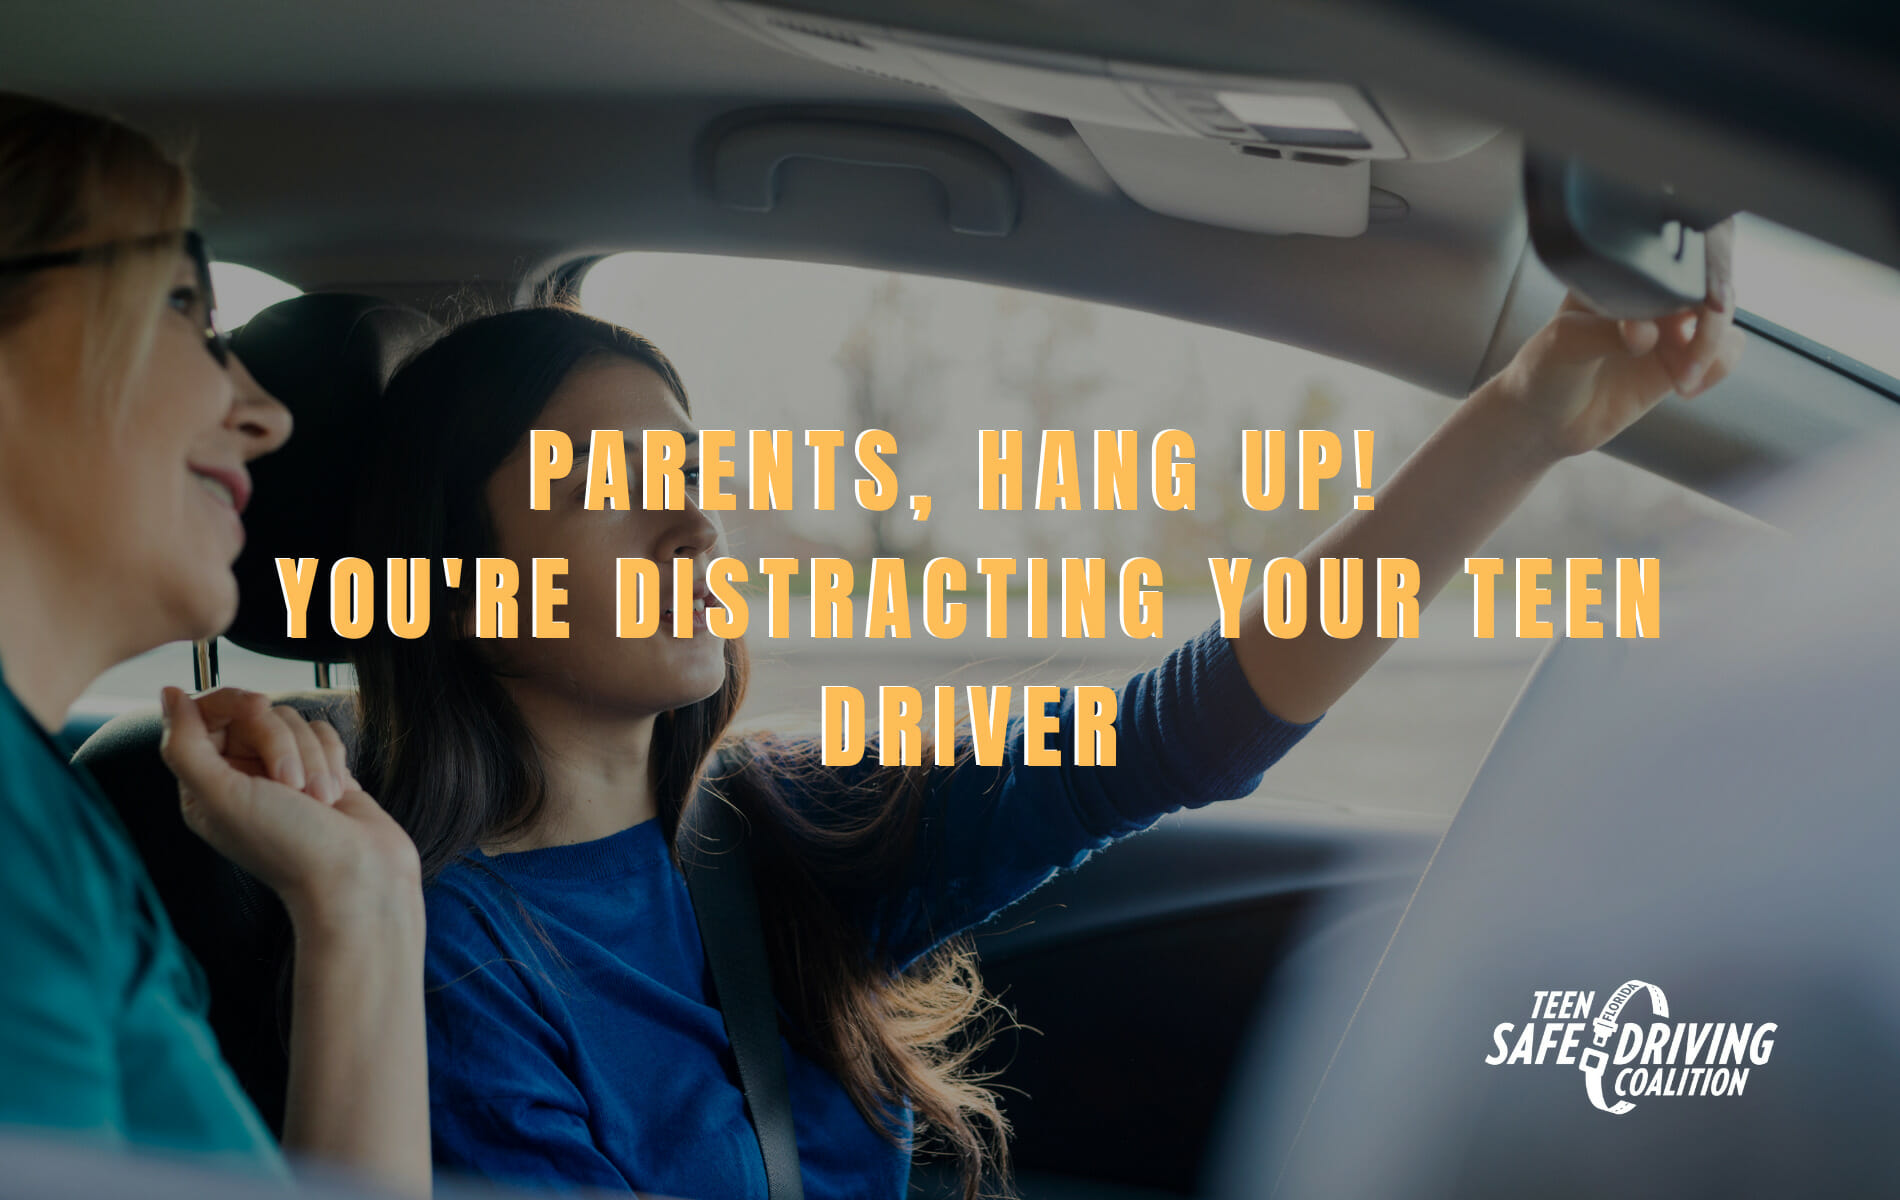 Parents, hang up! You’re distracting your teen driver